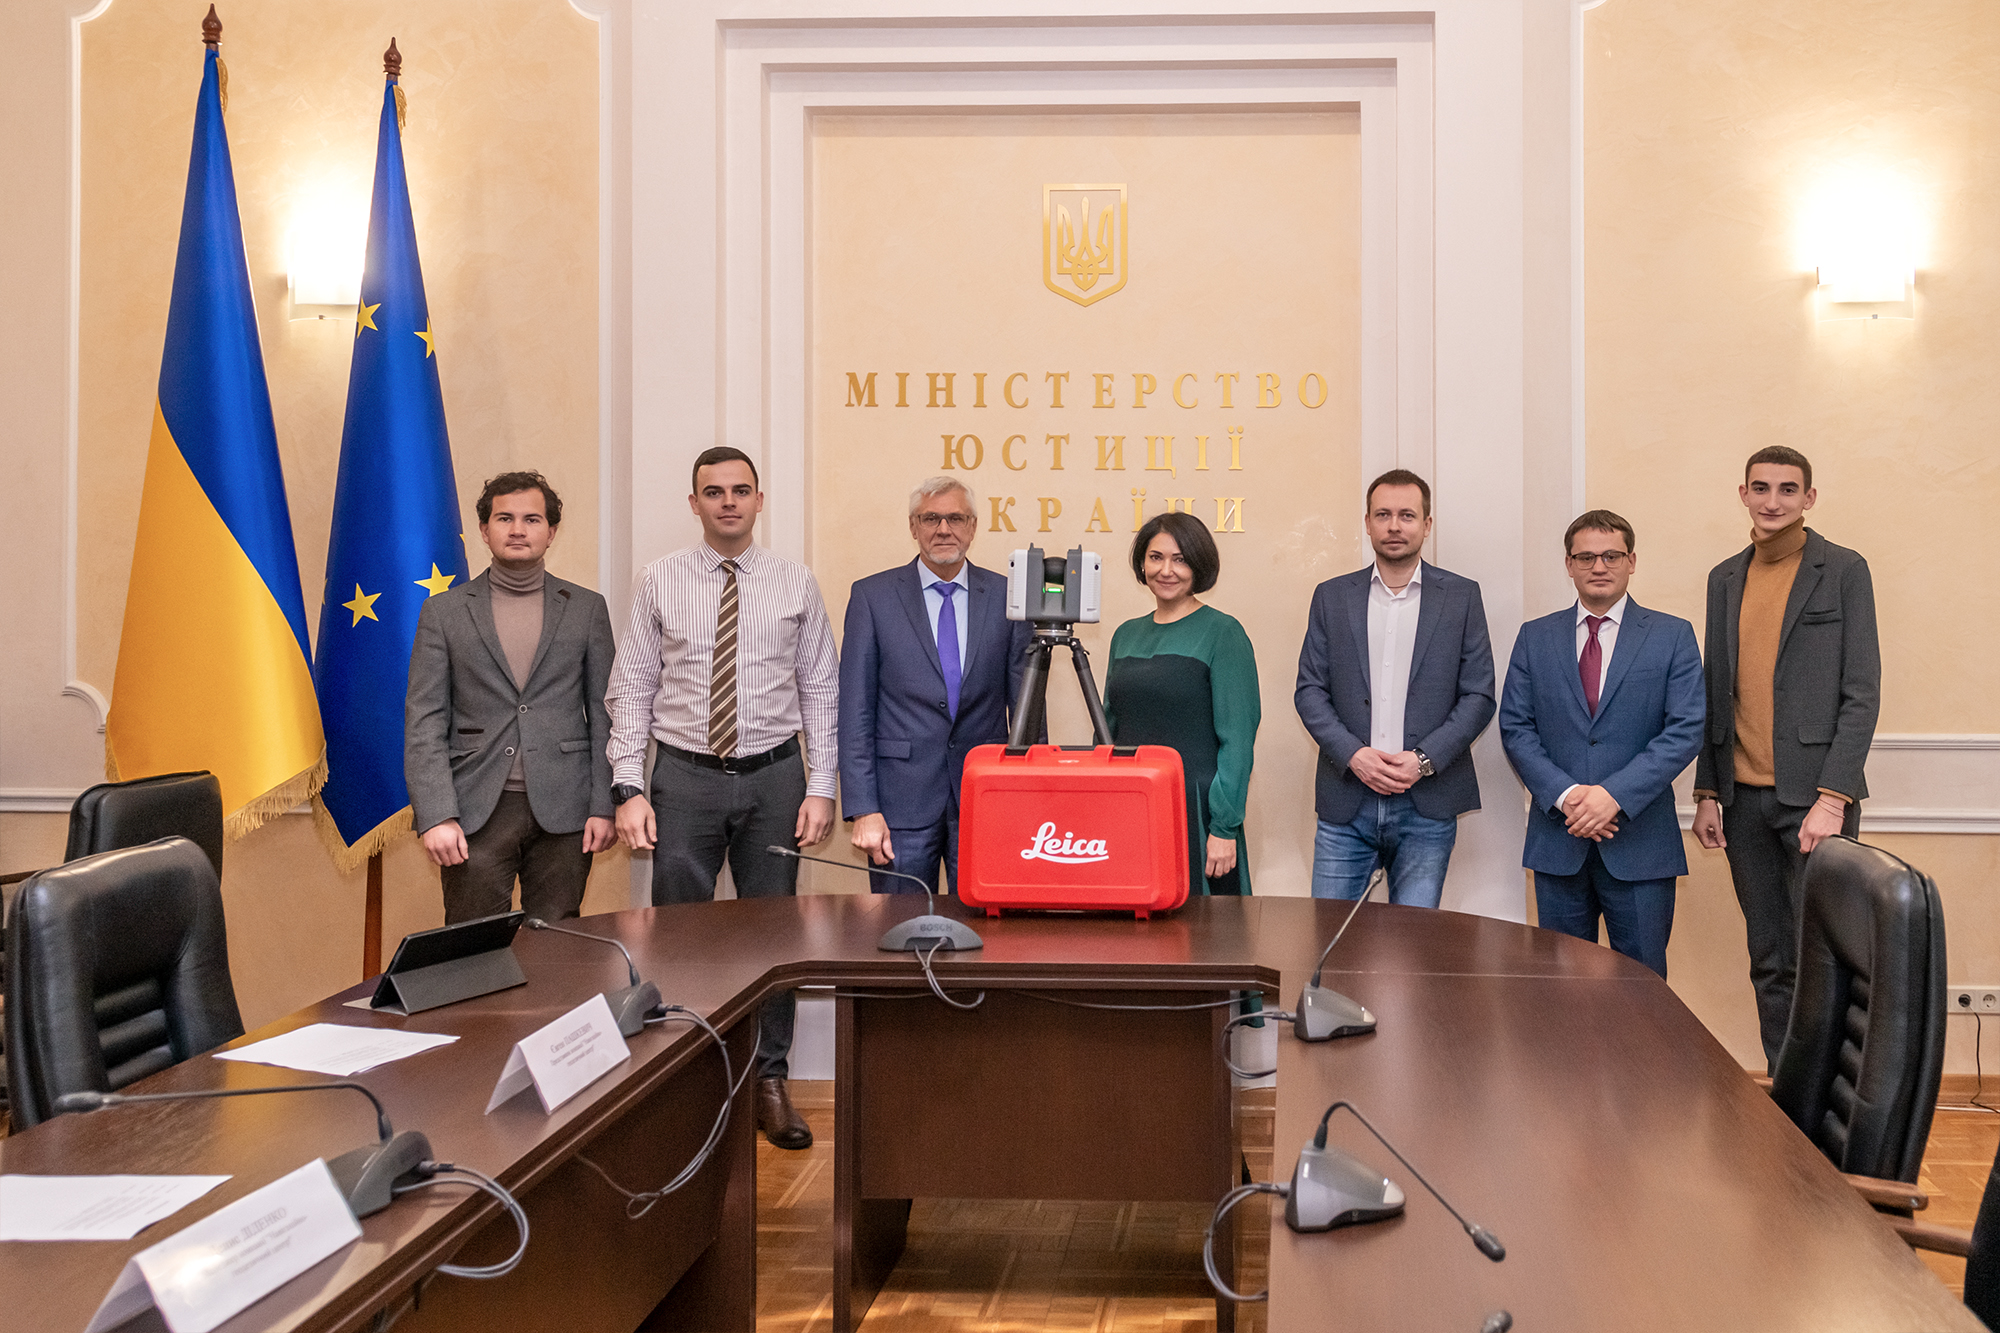 The EU Project Pravo-Justice handed over equipment for forensic examinations to the Ministry of Justice